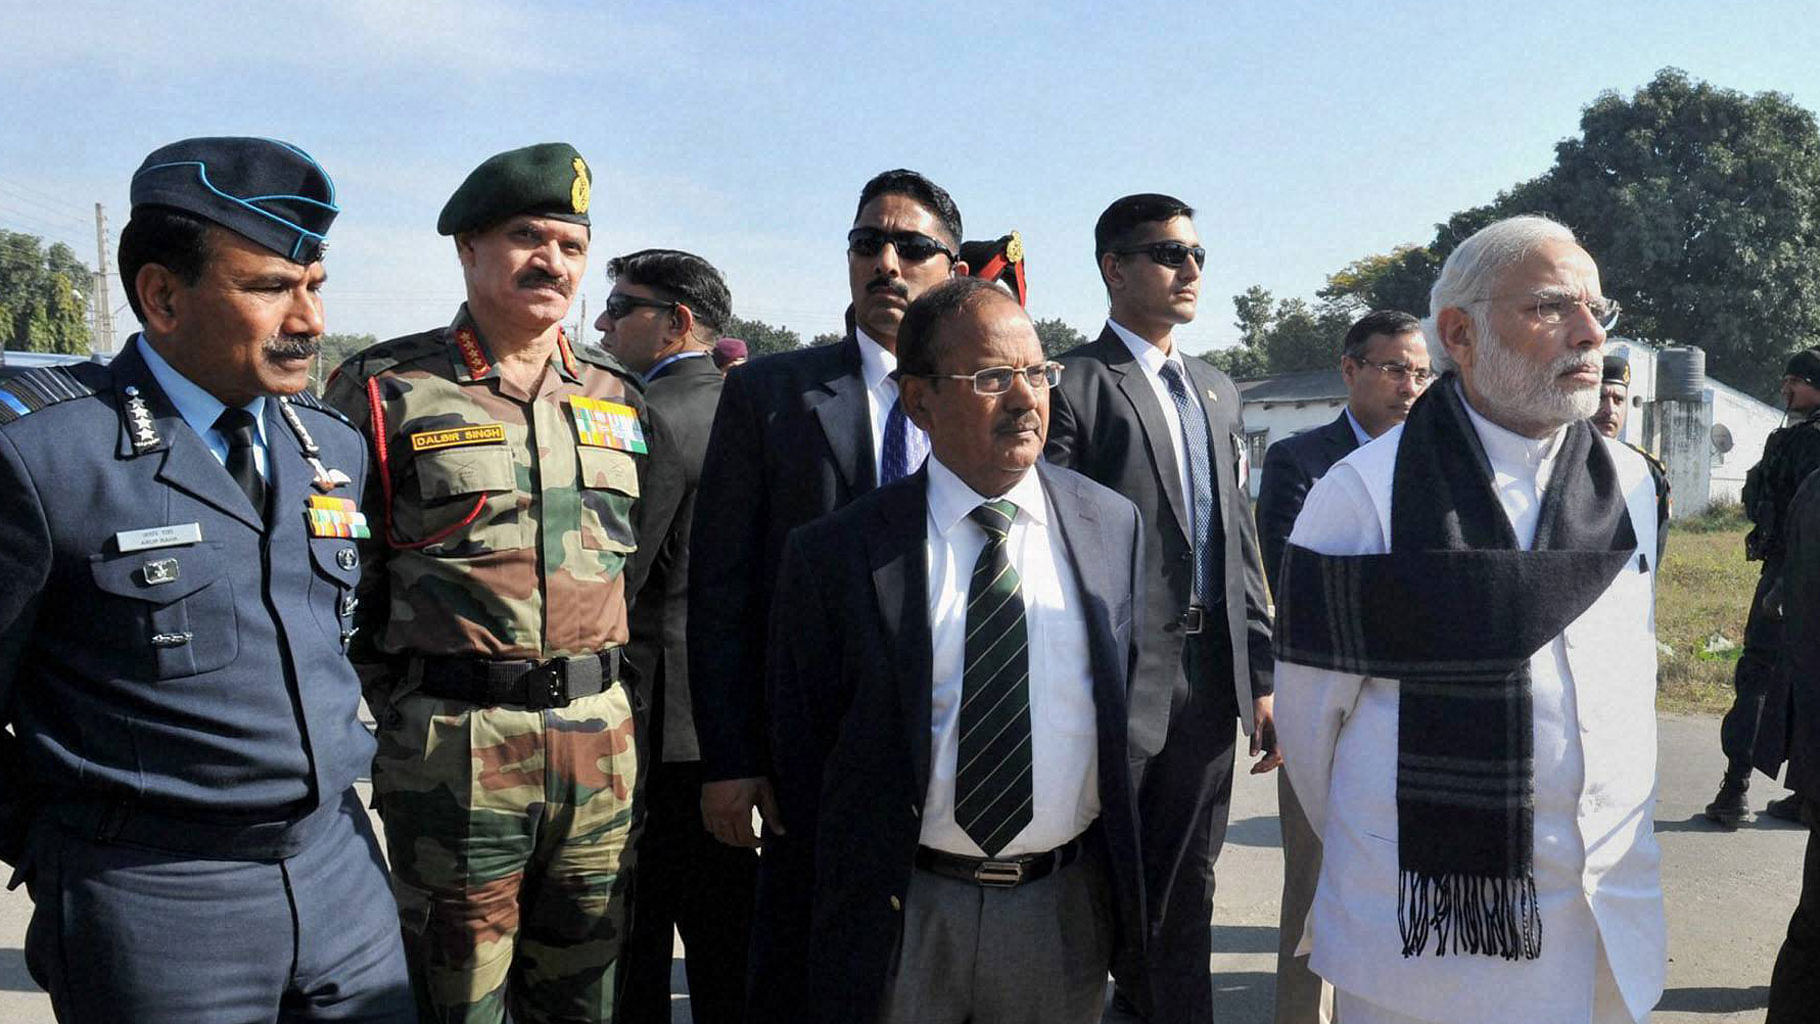 Narendra Modi and National Security Adviser Ajit Doval watching a presentation on counter-terrorist and combing operation by the Defence Forces, at Pathankot Airbase on Saturday. (File Photo: PTI)